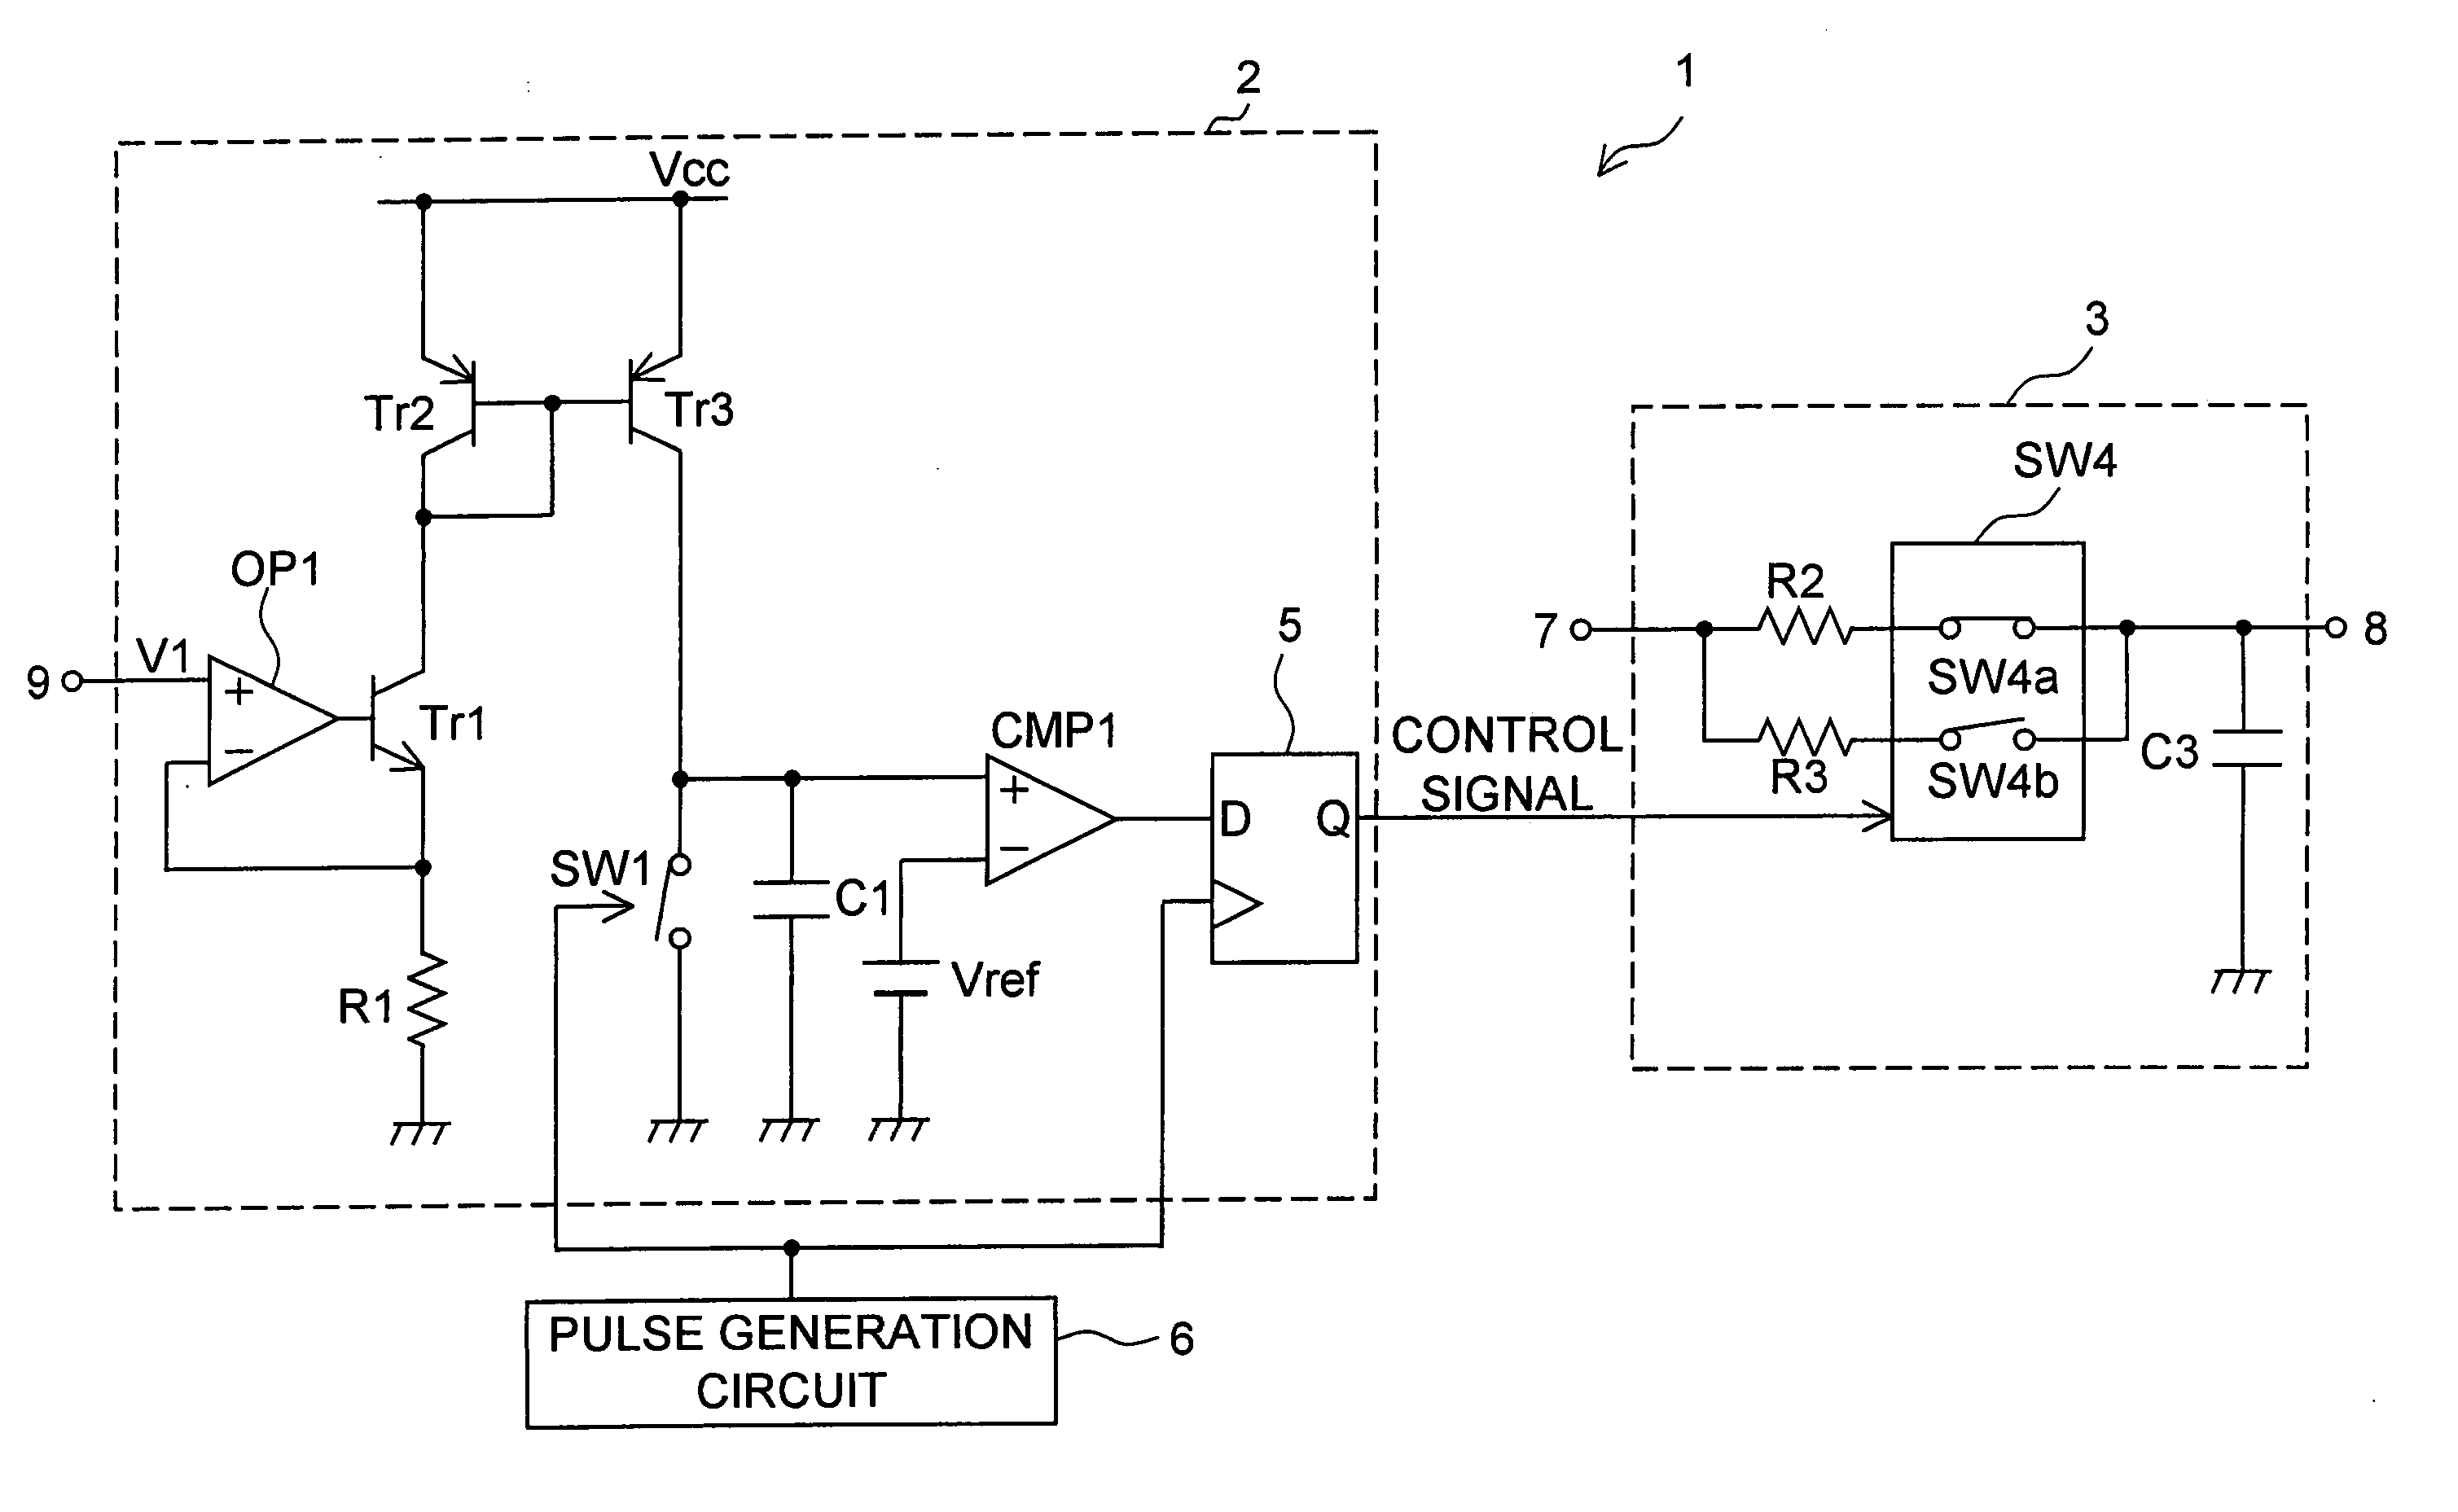 Automatic time constant adjustment circuit